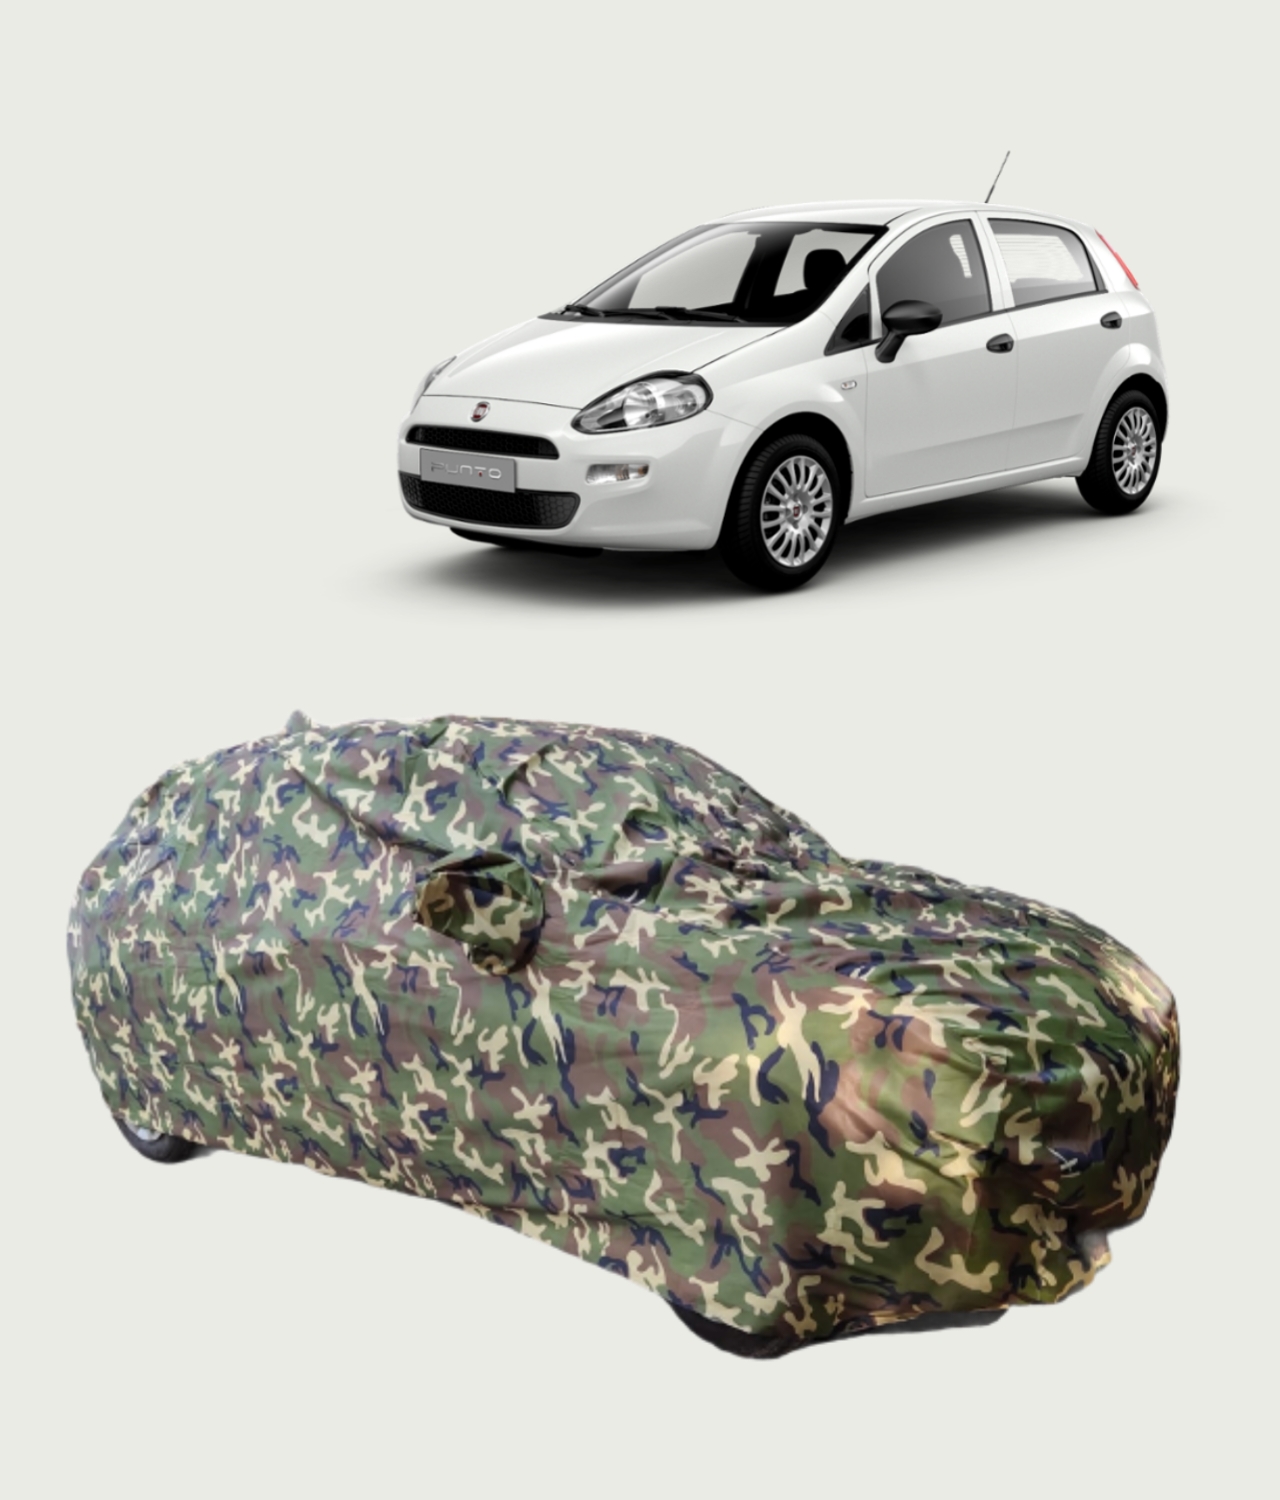 Buy Waterproof Car Body Cover For Fiat Punto Online at Best in India